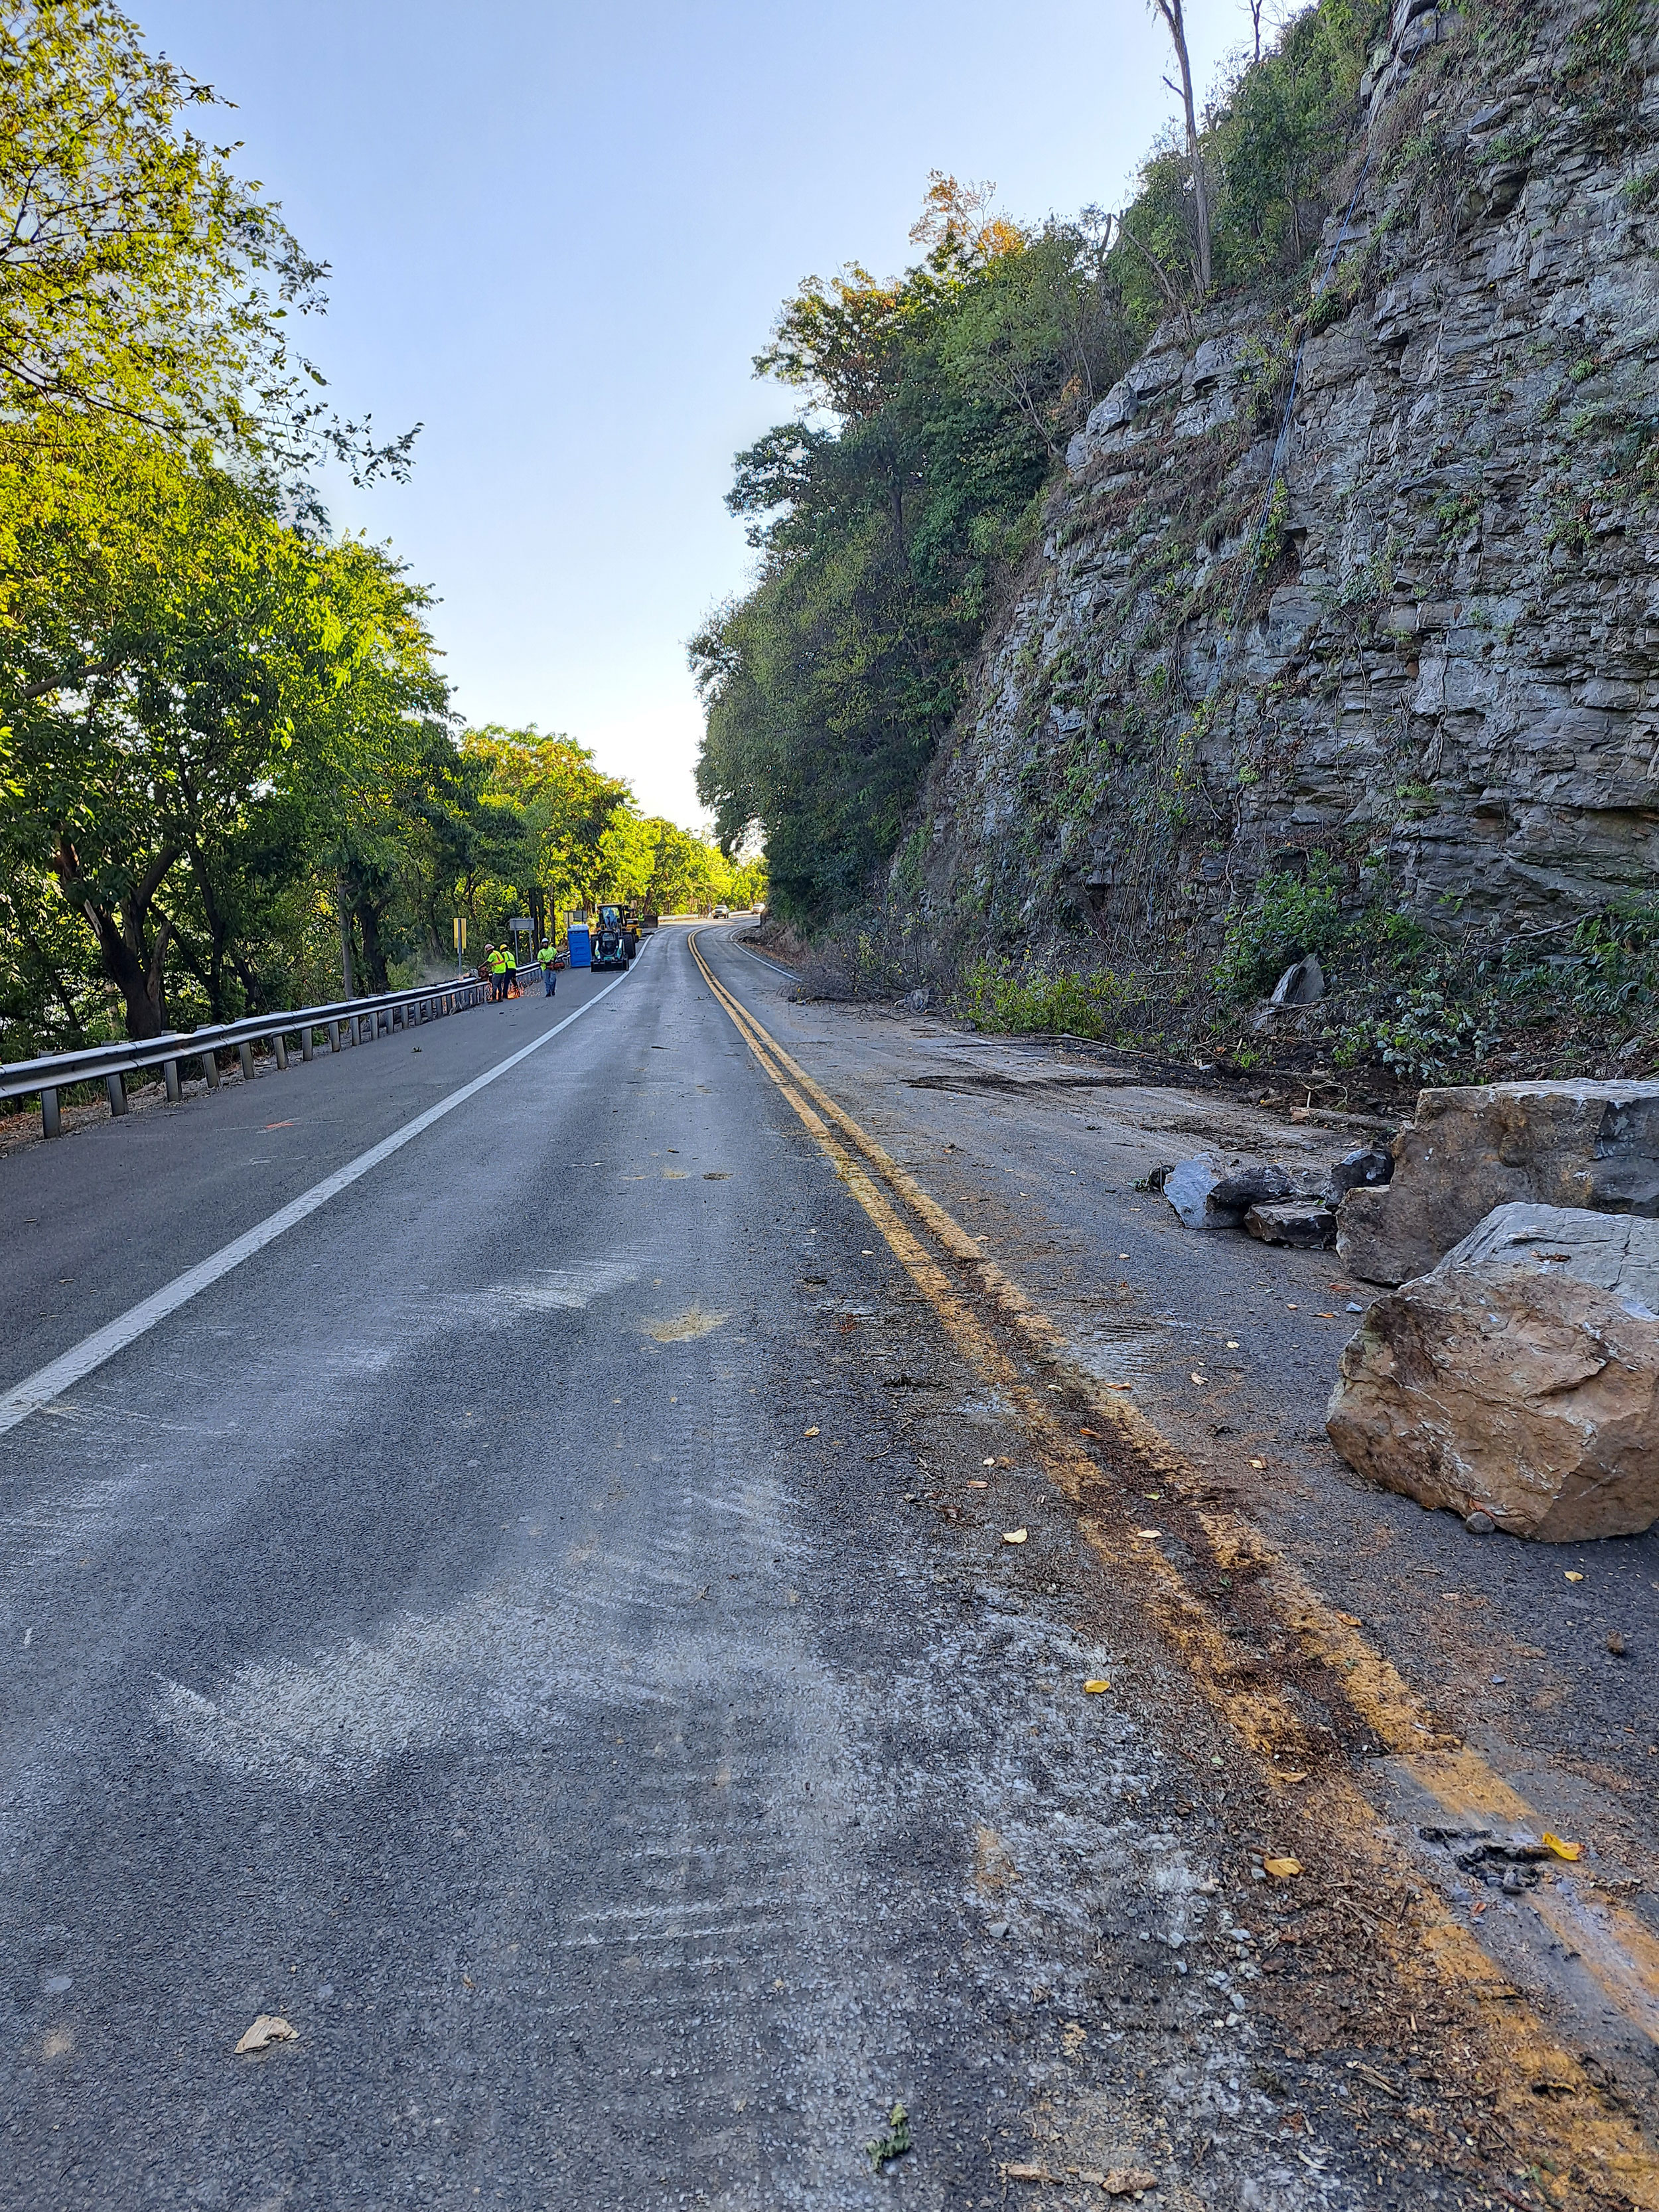 Photo shows the removal of loose rocks at the bottom of the slope onto US 340.  Impacts from rock removal is visible on the US 340 roadway surface.